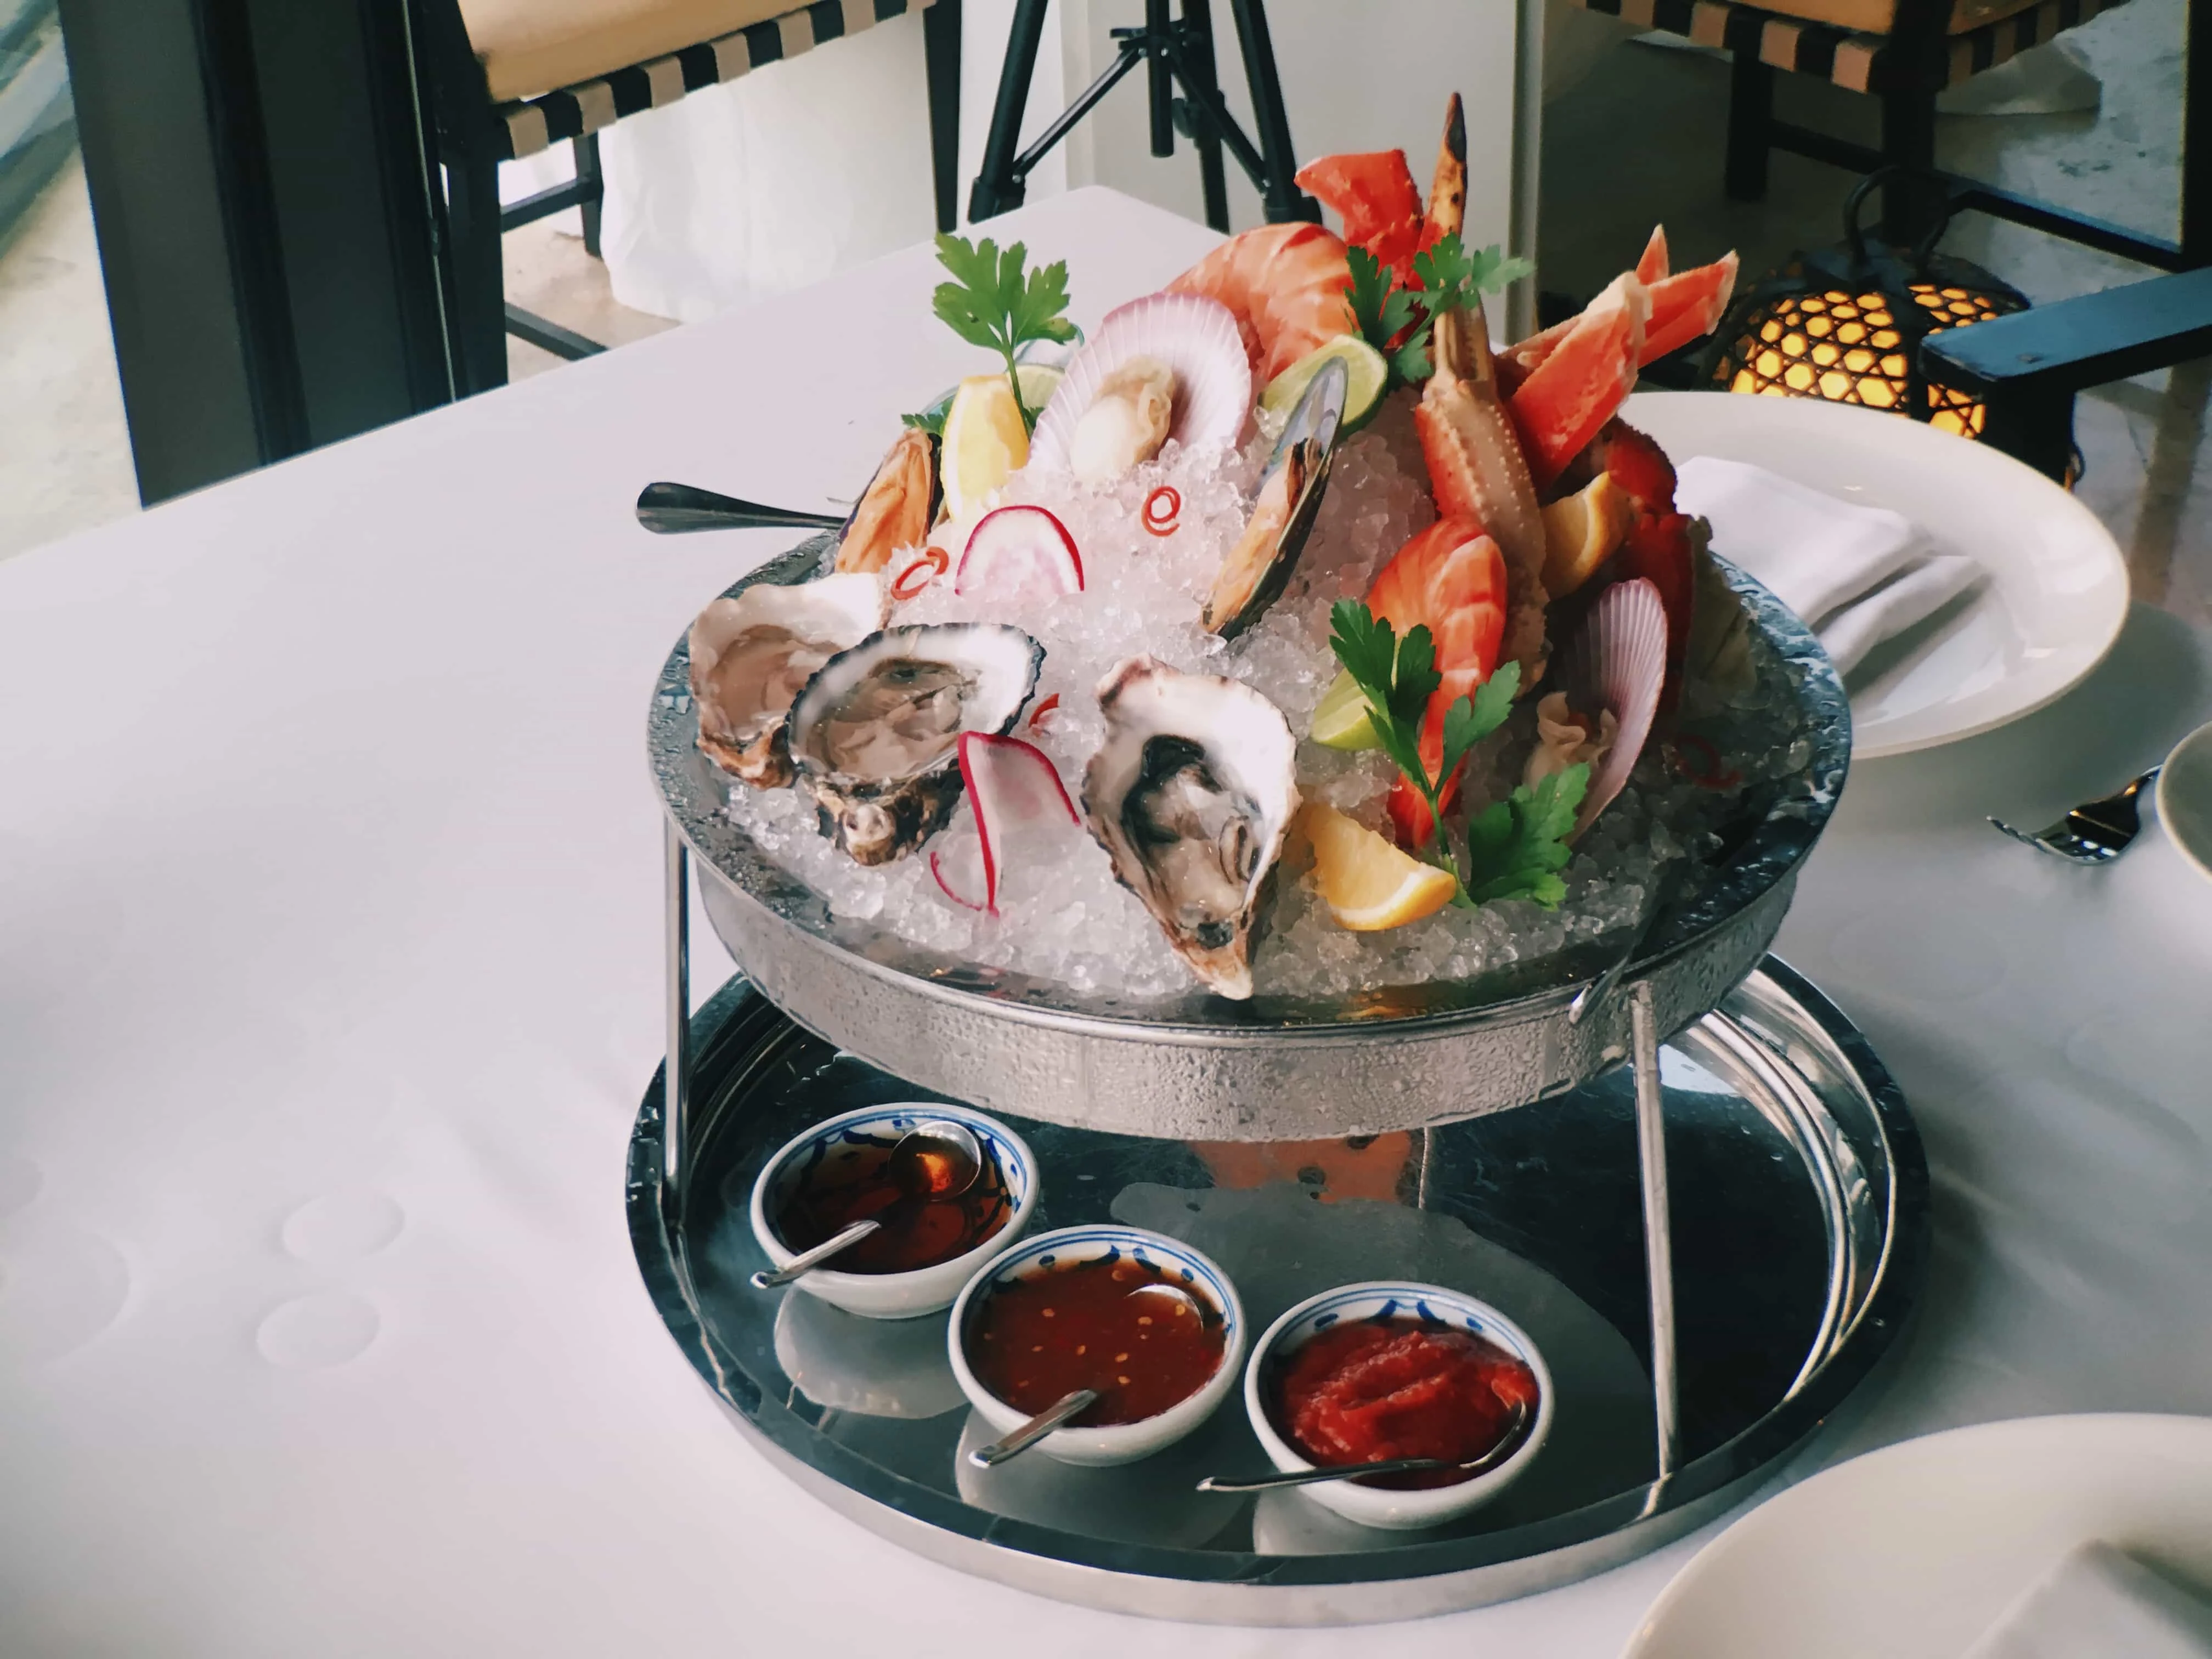 Thai Food And Thai Dishes, The signature Hyatt Regency chilled seafood is such a delight to eat!